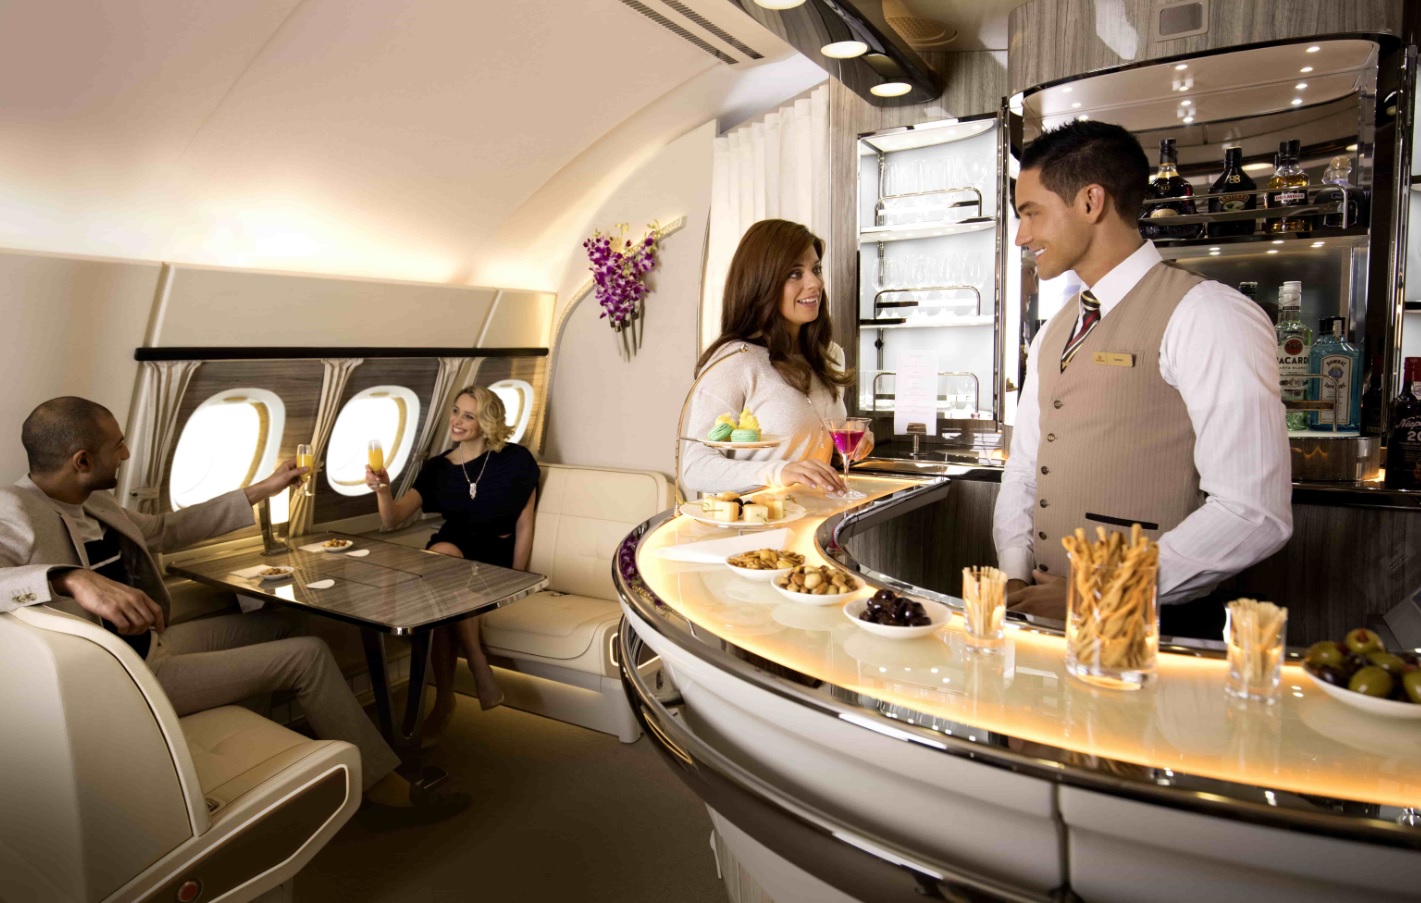 Emirates' popular onboard lounge on its Airbus A380s